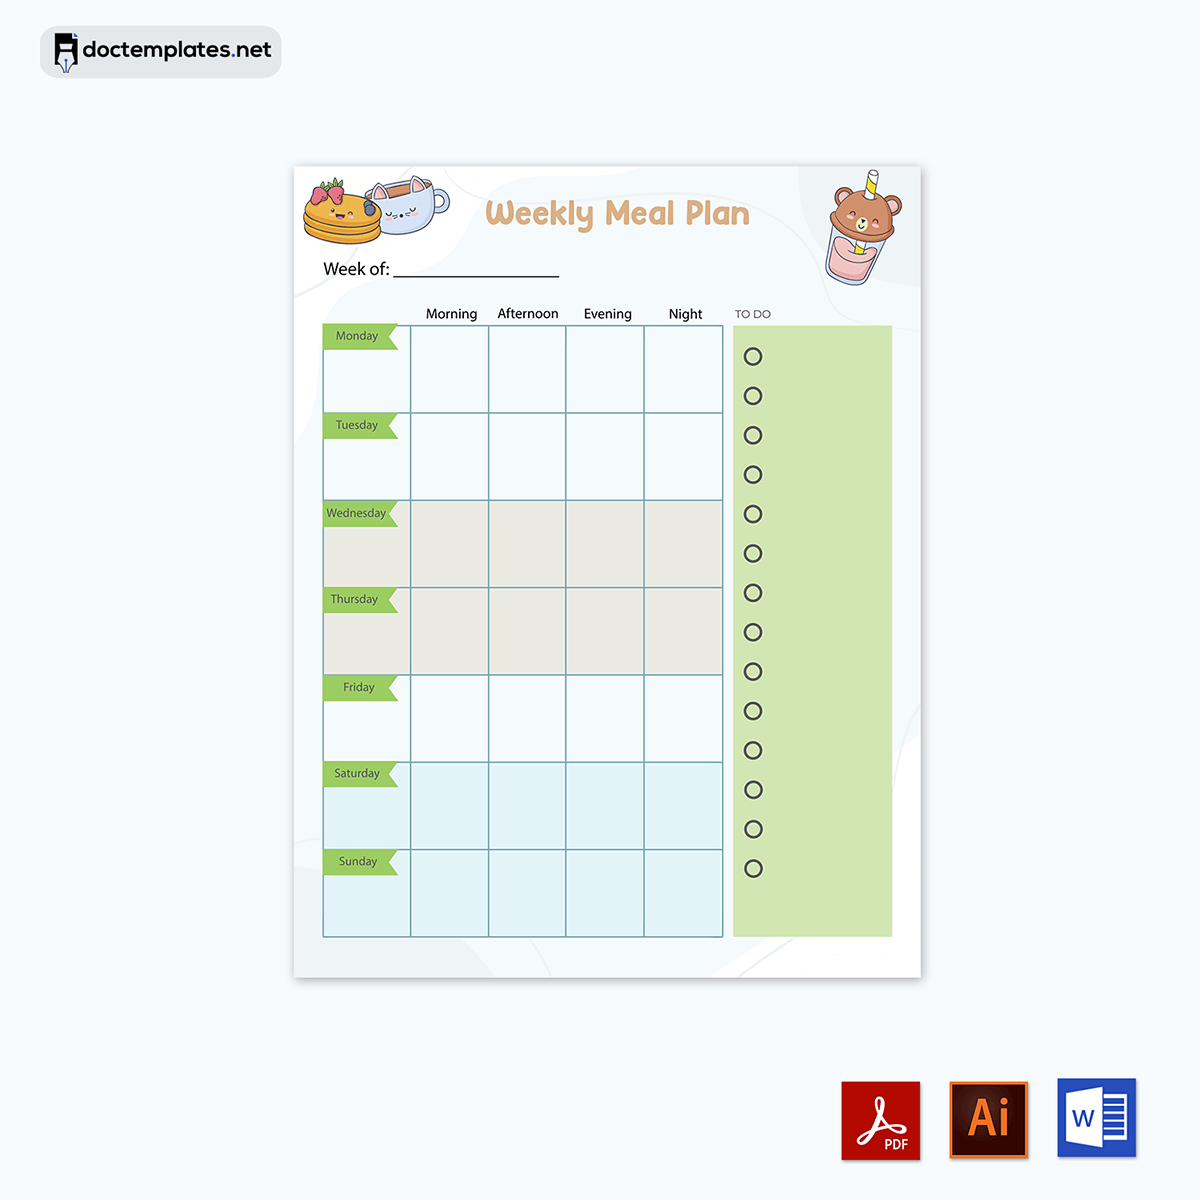 Premium Meal Planning Made Easy with Adobe Illustrator